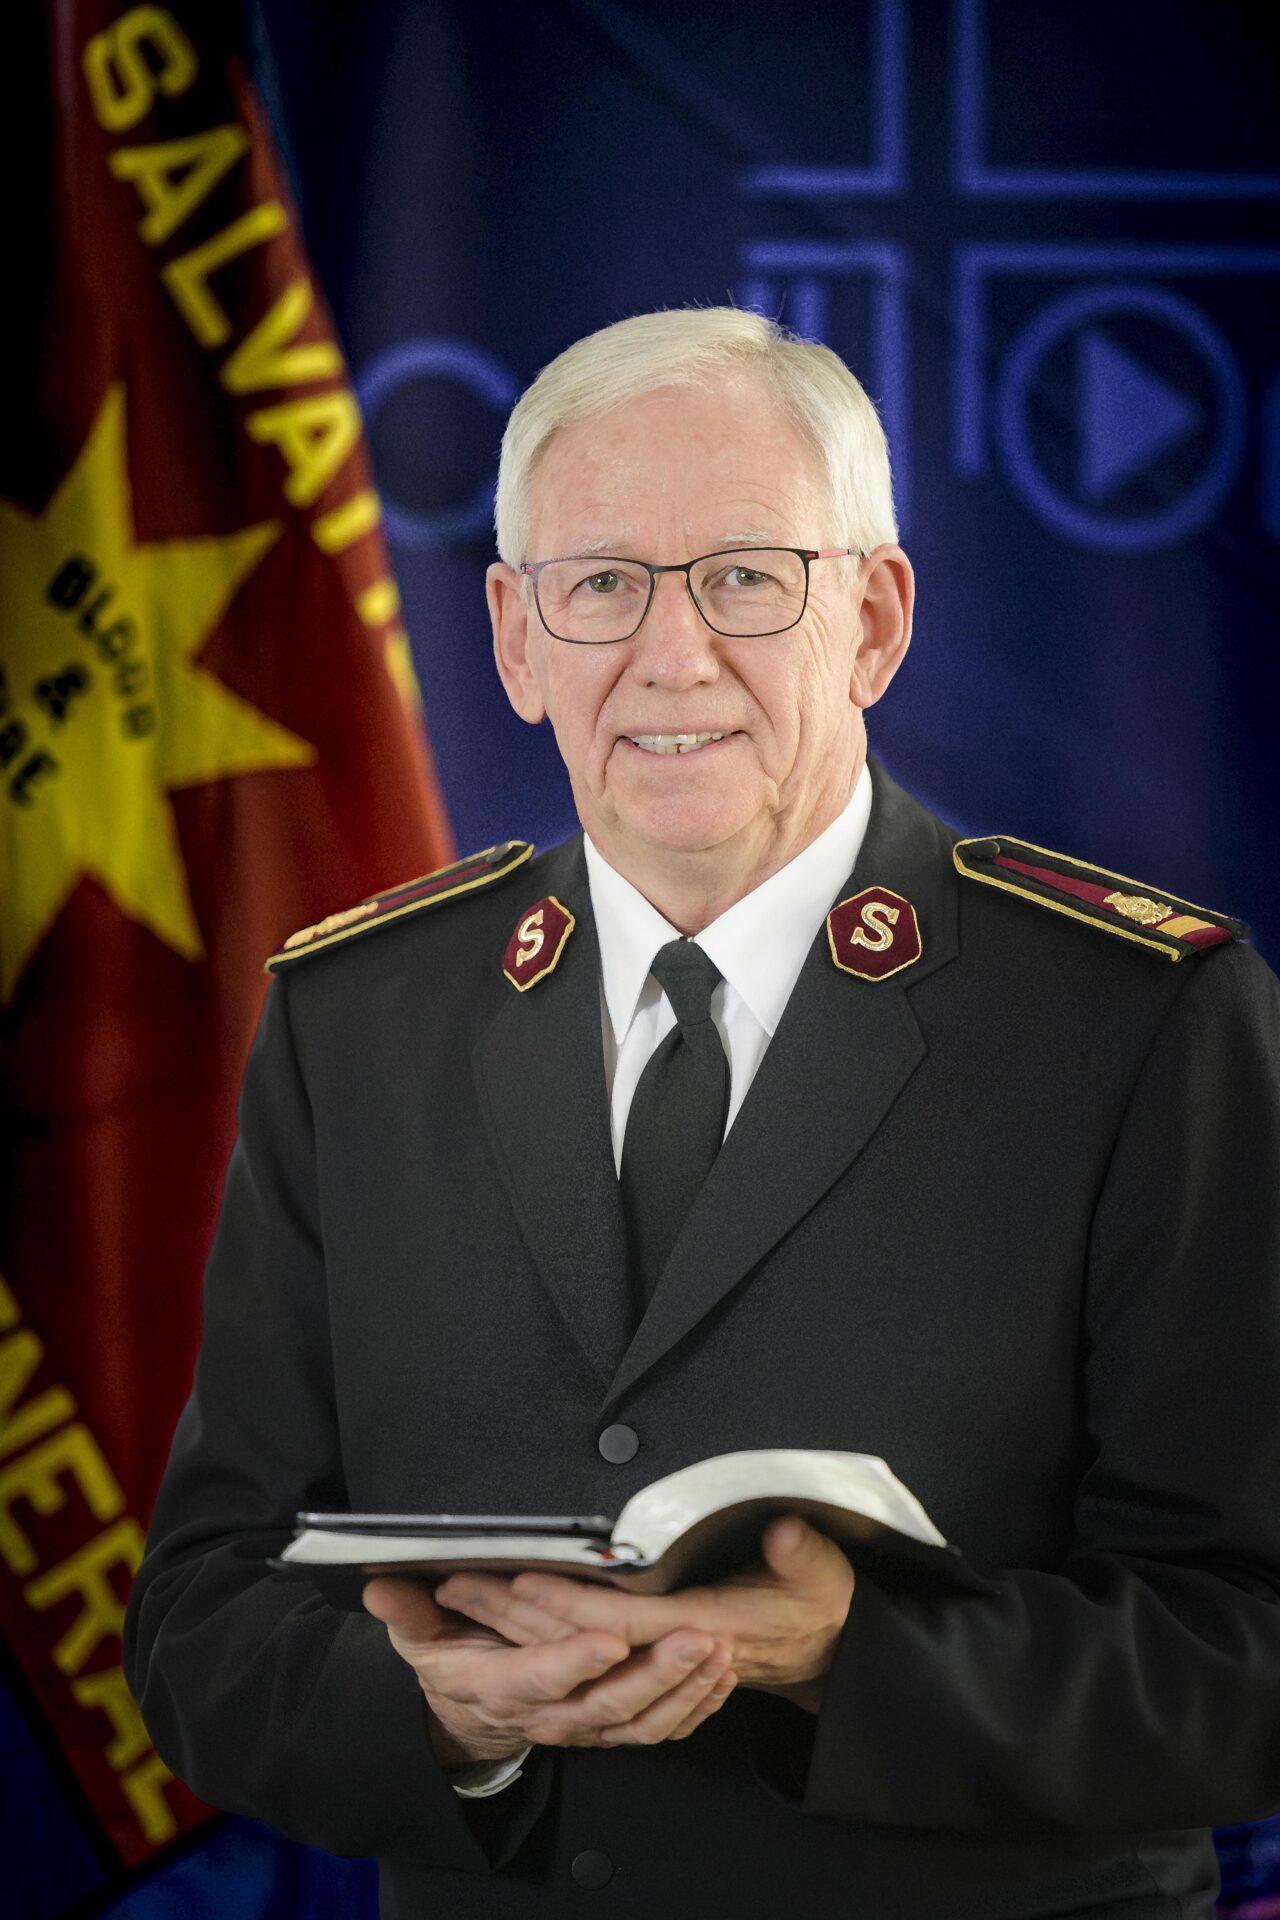 Salvation army General Brian Peddle